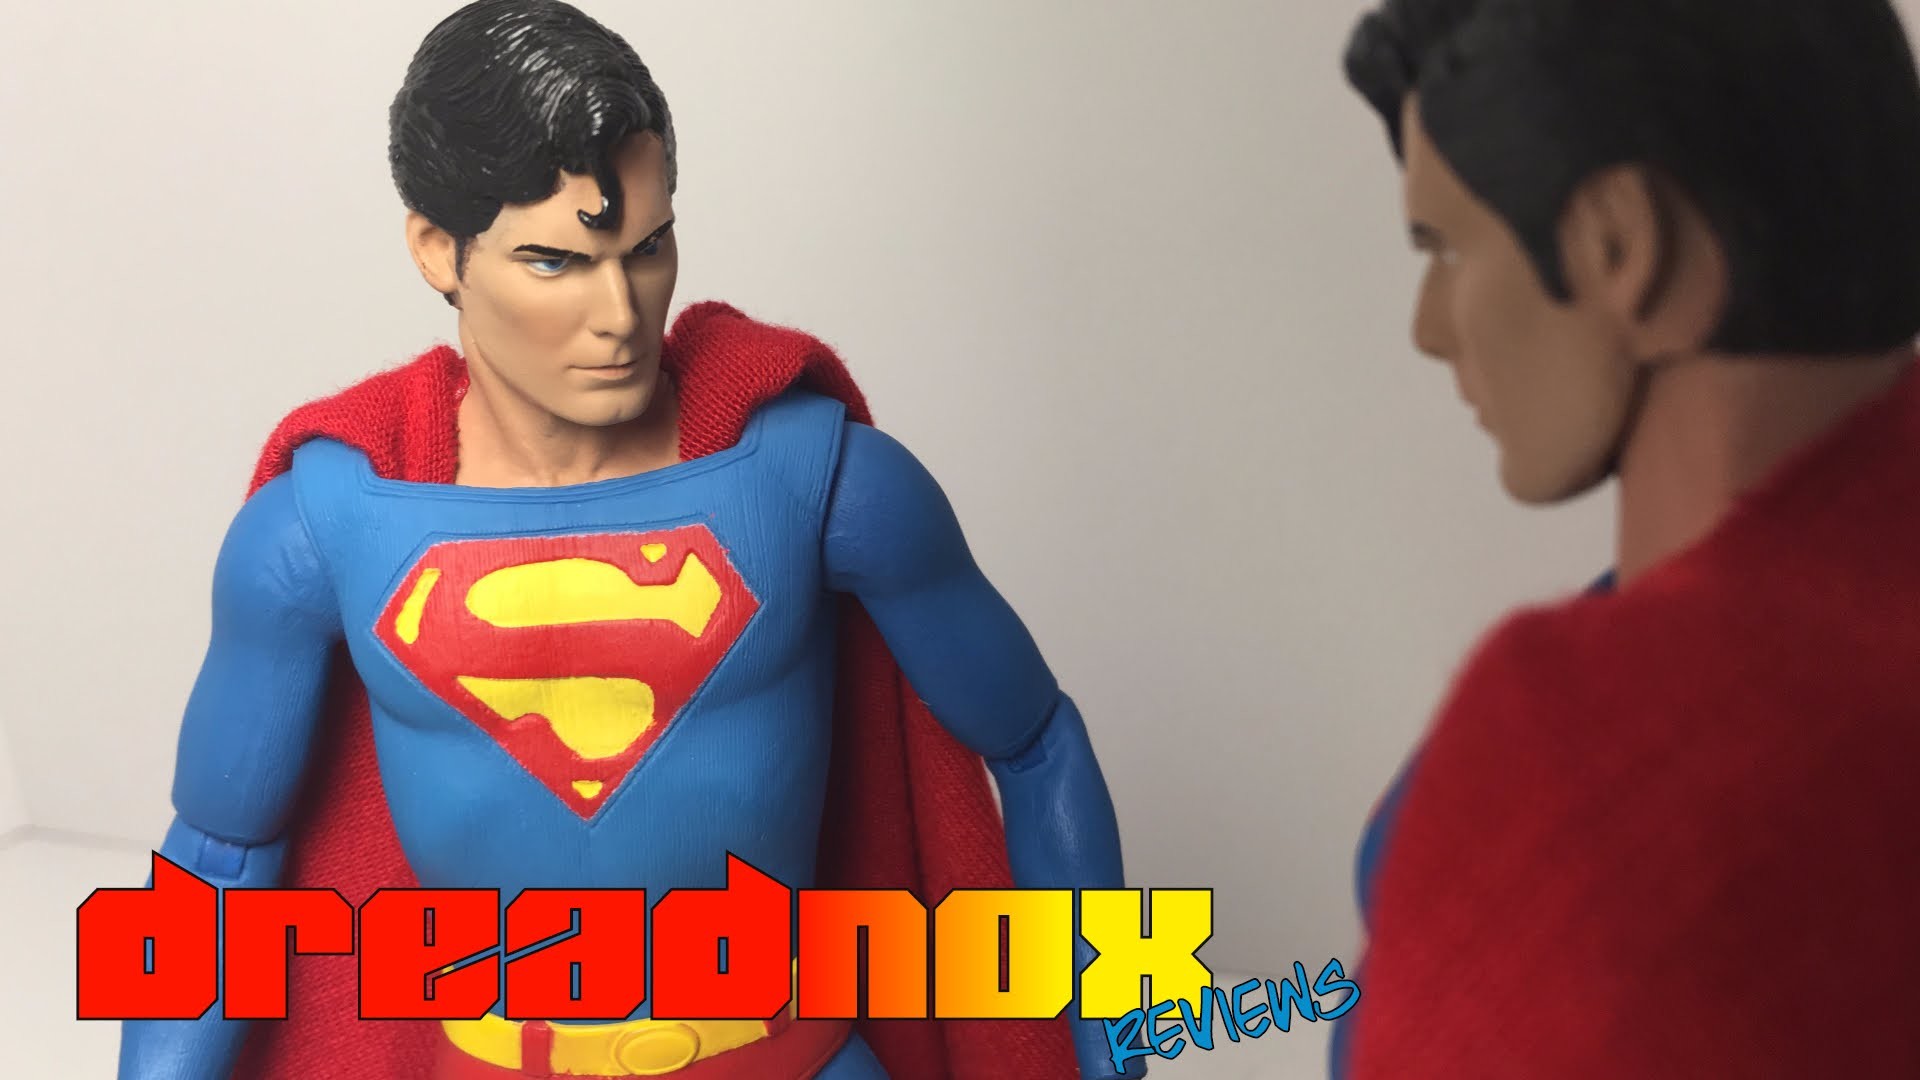 1920x1080 NECA DC Comics Superman the Movie Christopher Reeve Action Figure Review -  YouTube